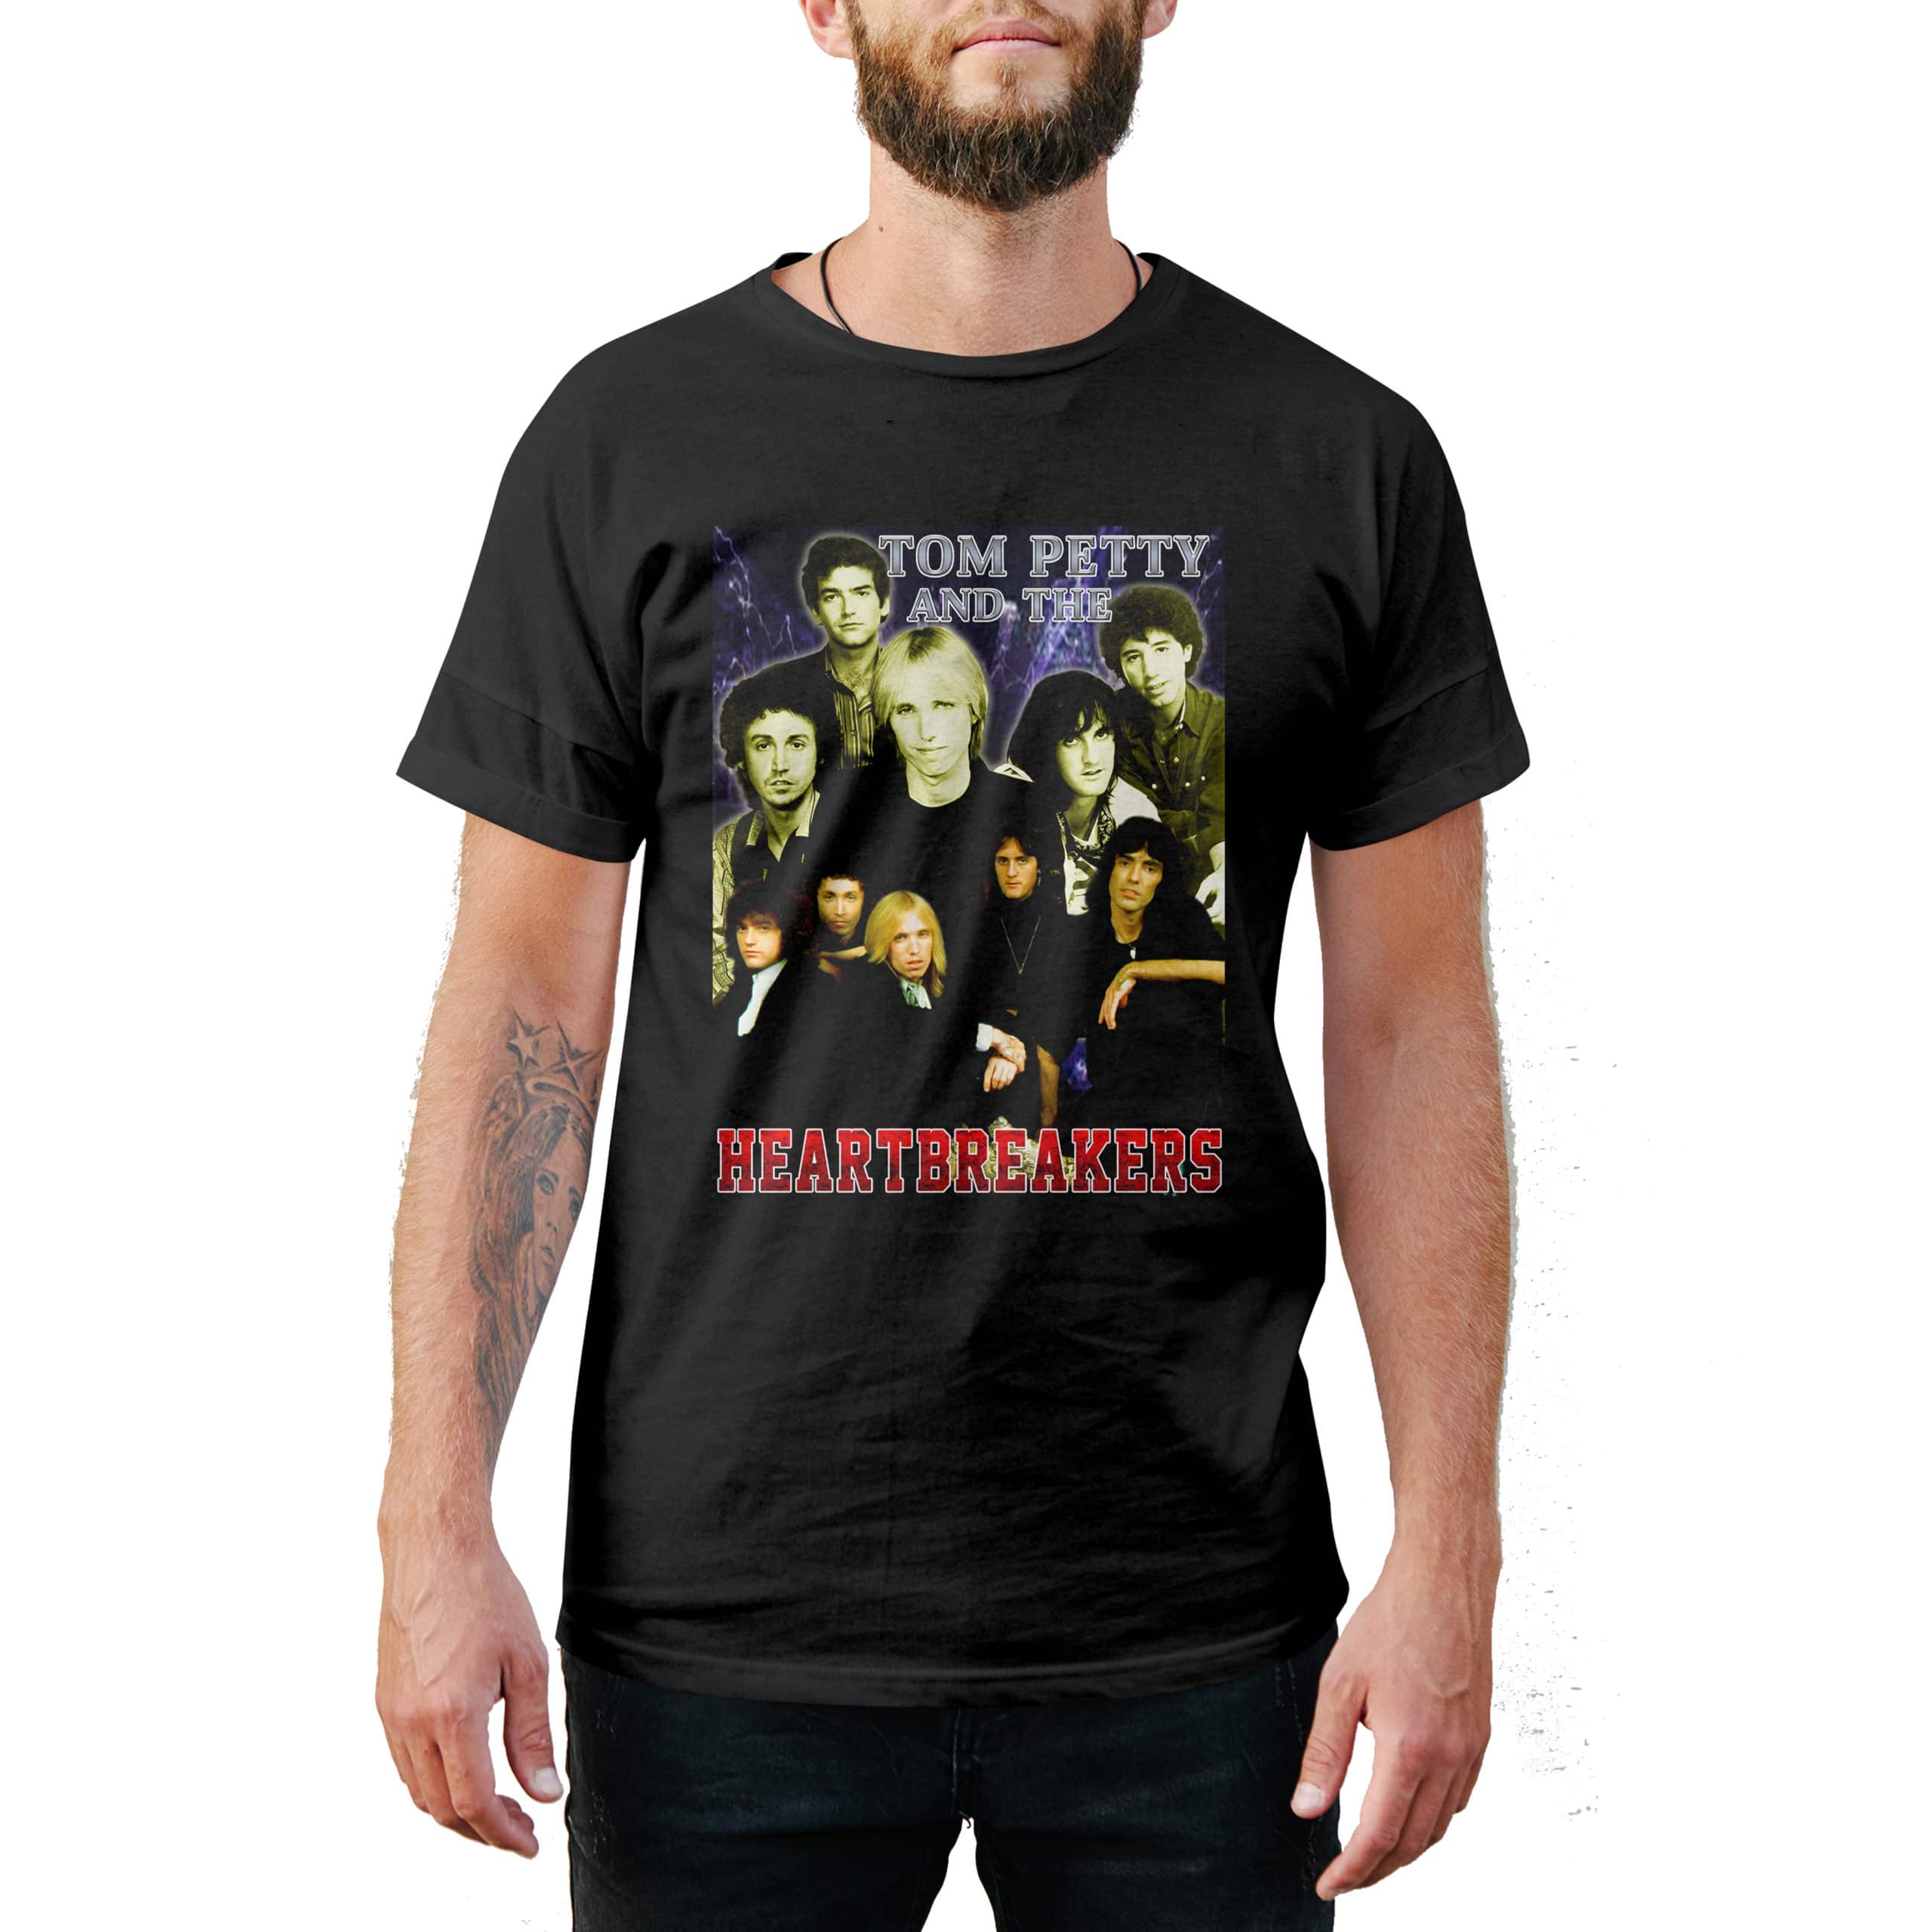 Vintage Style Tom Petty and the Heartbreakers T-Shirt